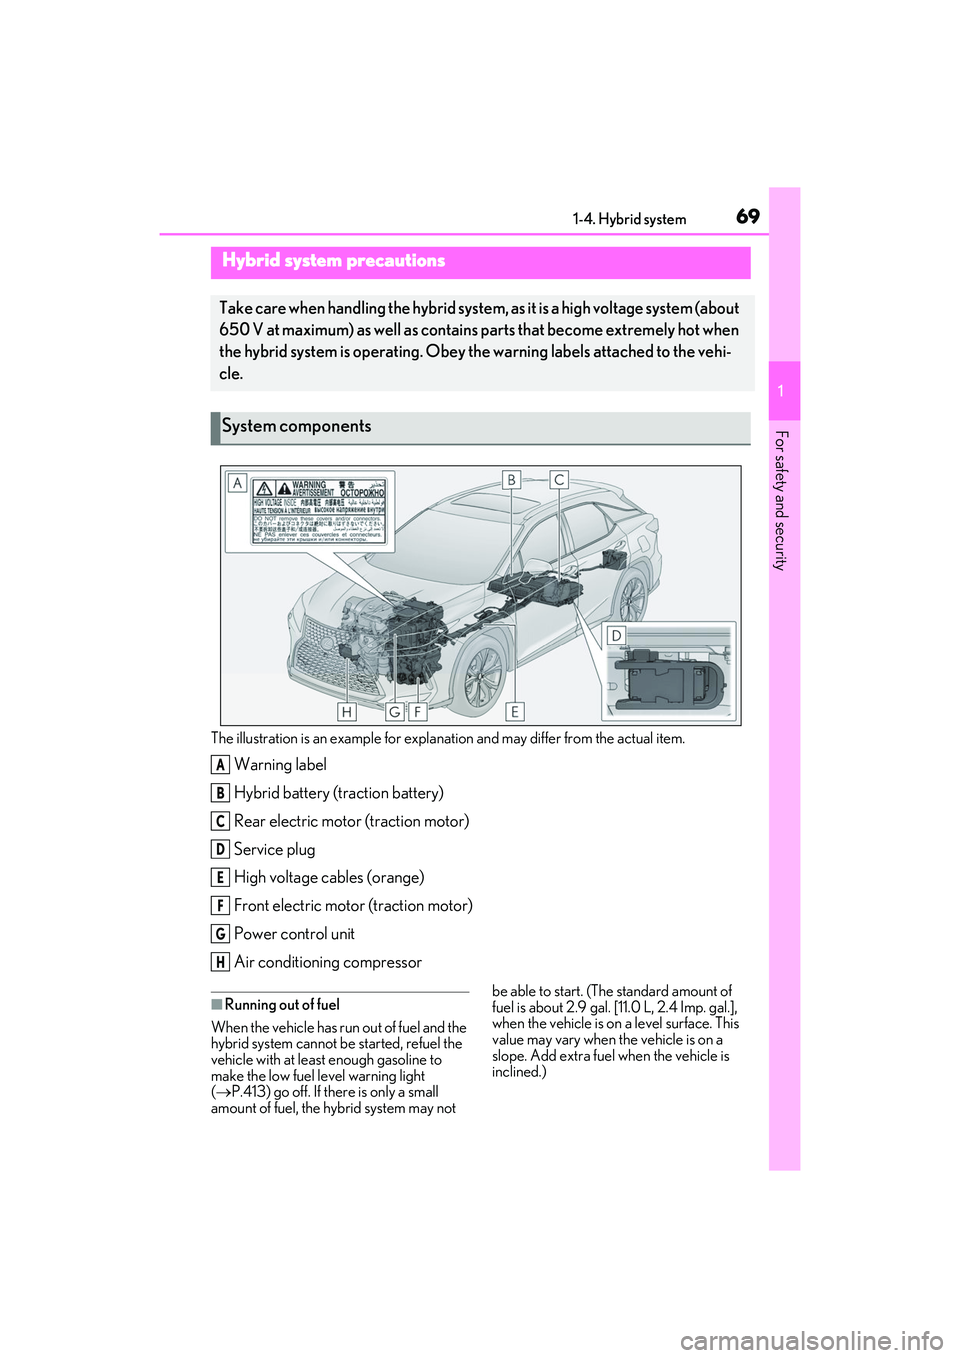 LEXUS RX450h 2022 Owners Guide 691-4. Hybrid system
1
For safety and security
The illustration is an example for explanation and may differ from the actual item.
Warning label
Hybrid battery (traction battery)
Rear electric motor (